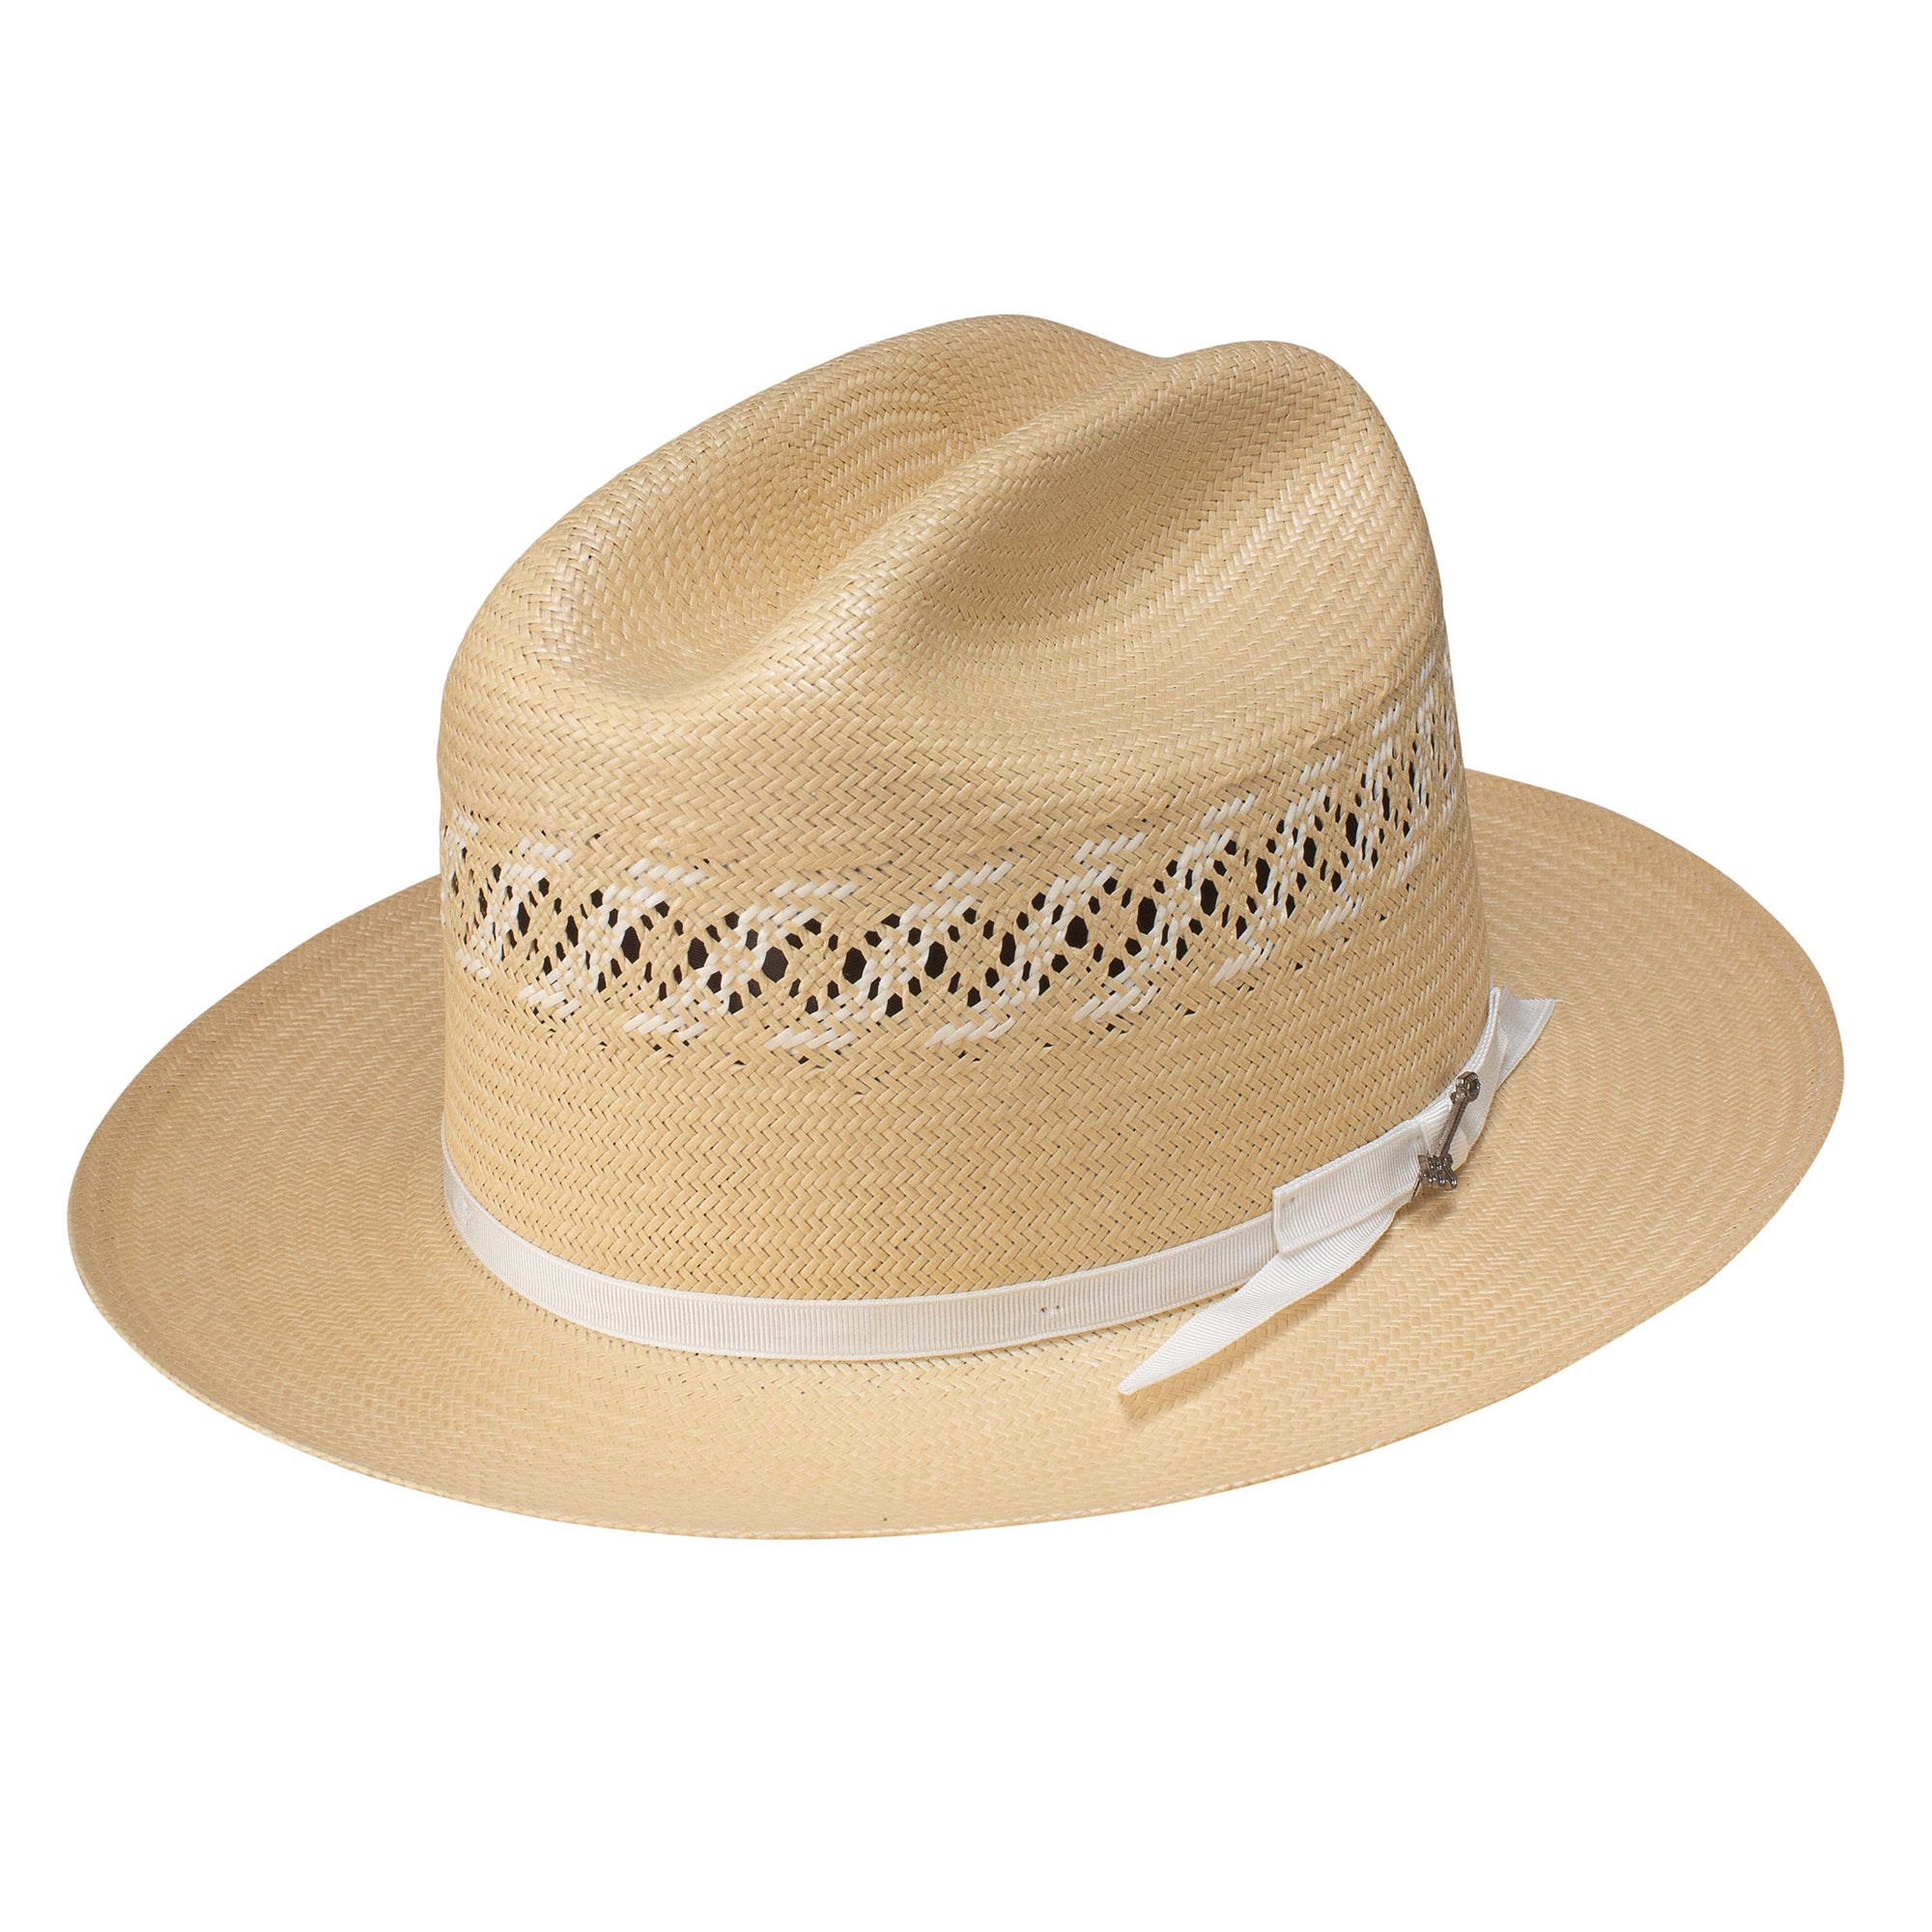 Stetson Limited Edition Open Road Shantung Straw Hat